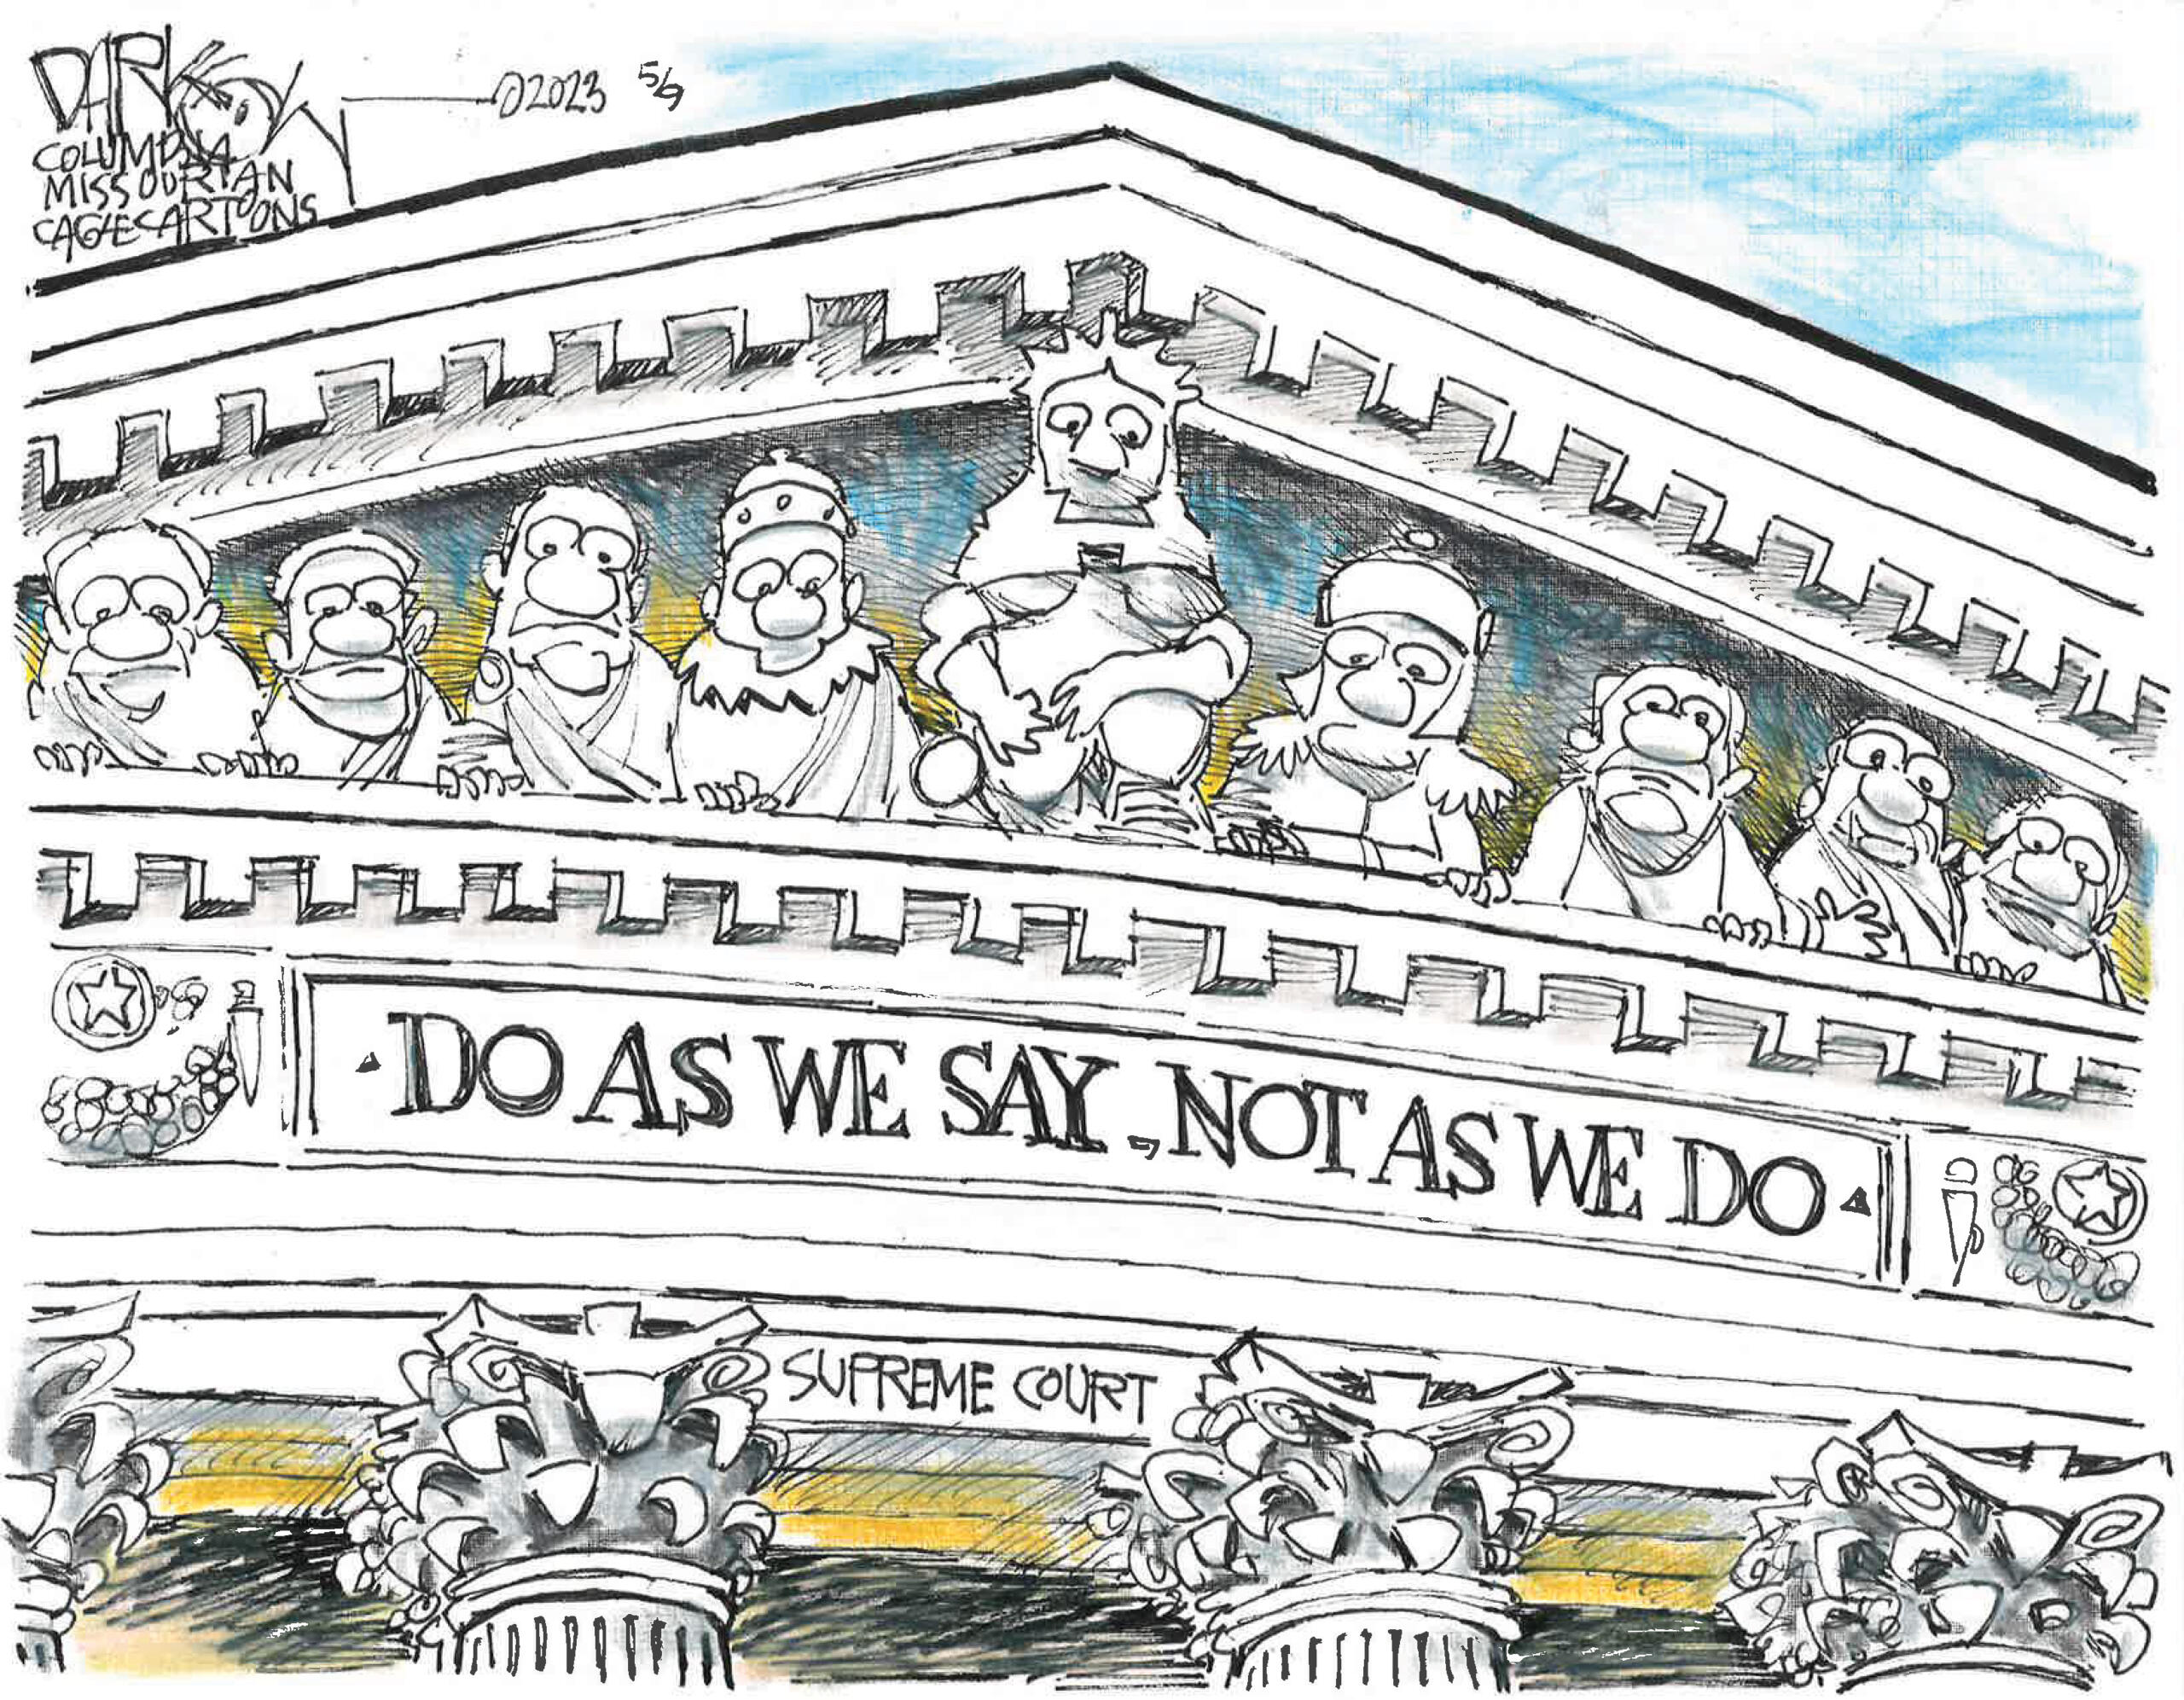 Editorial cartoons for week of May 7 photo gallery